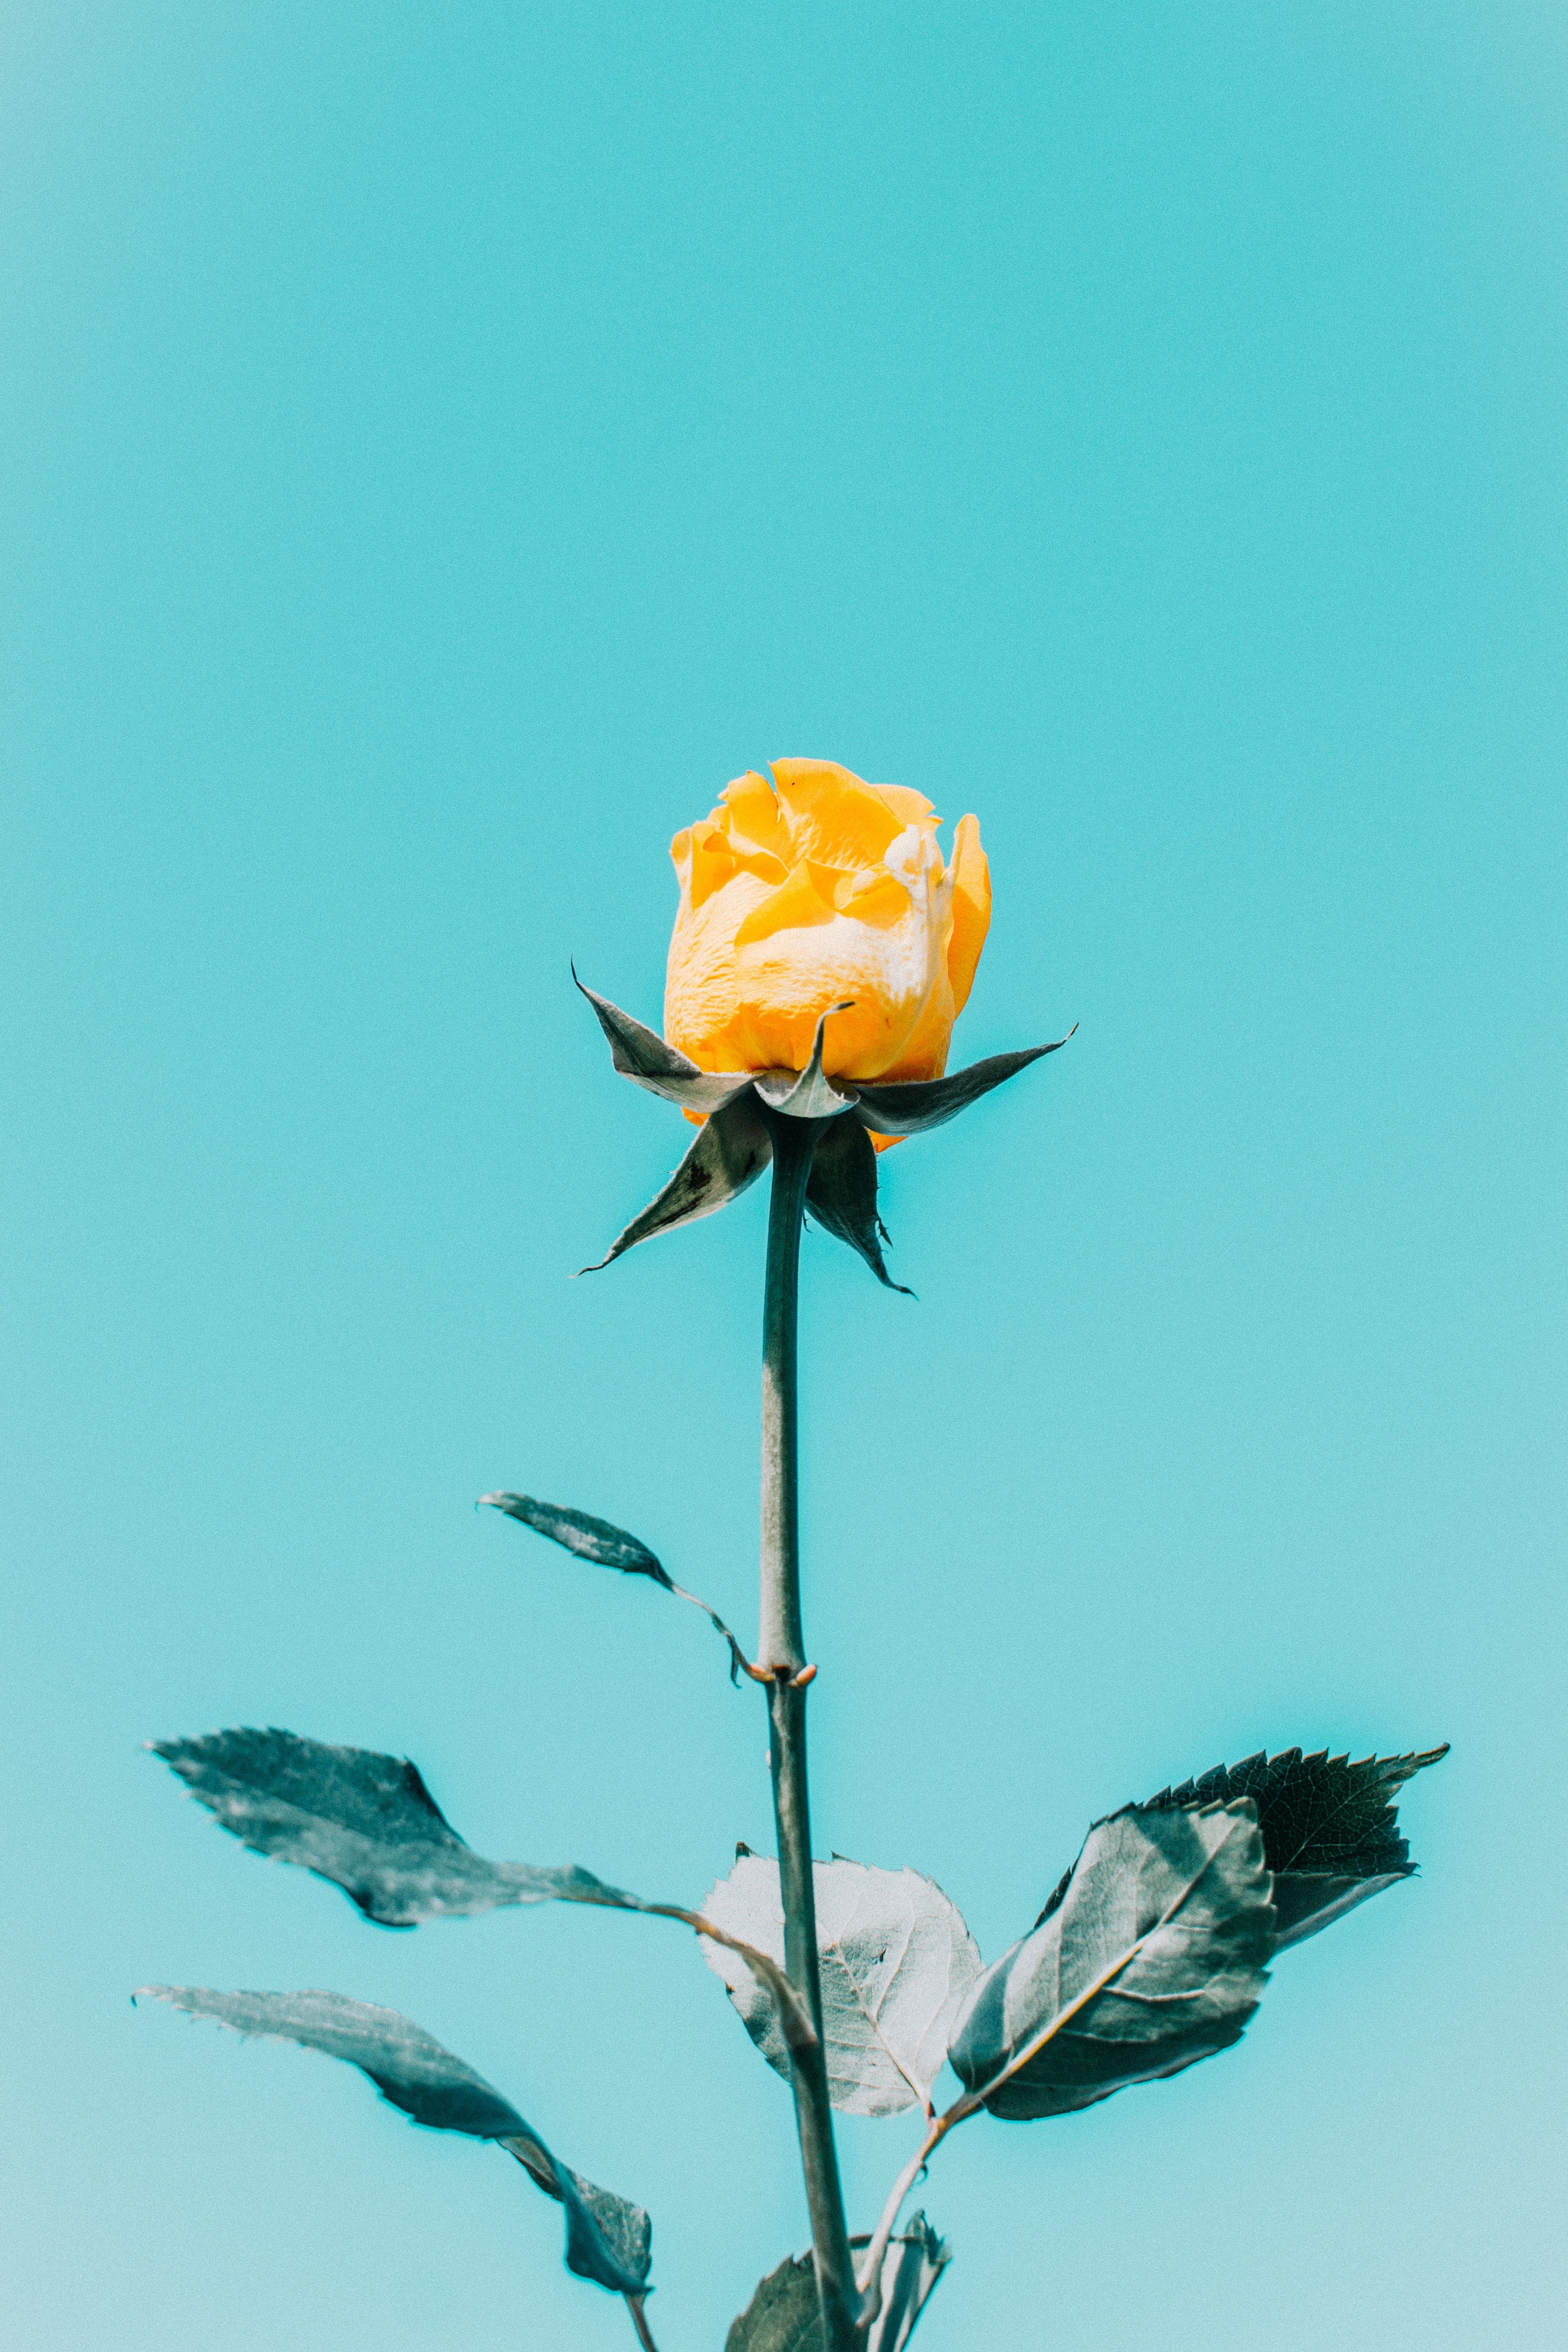 A single yellow rose on top of stem - Roses